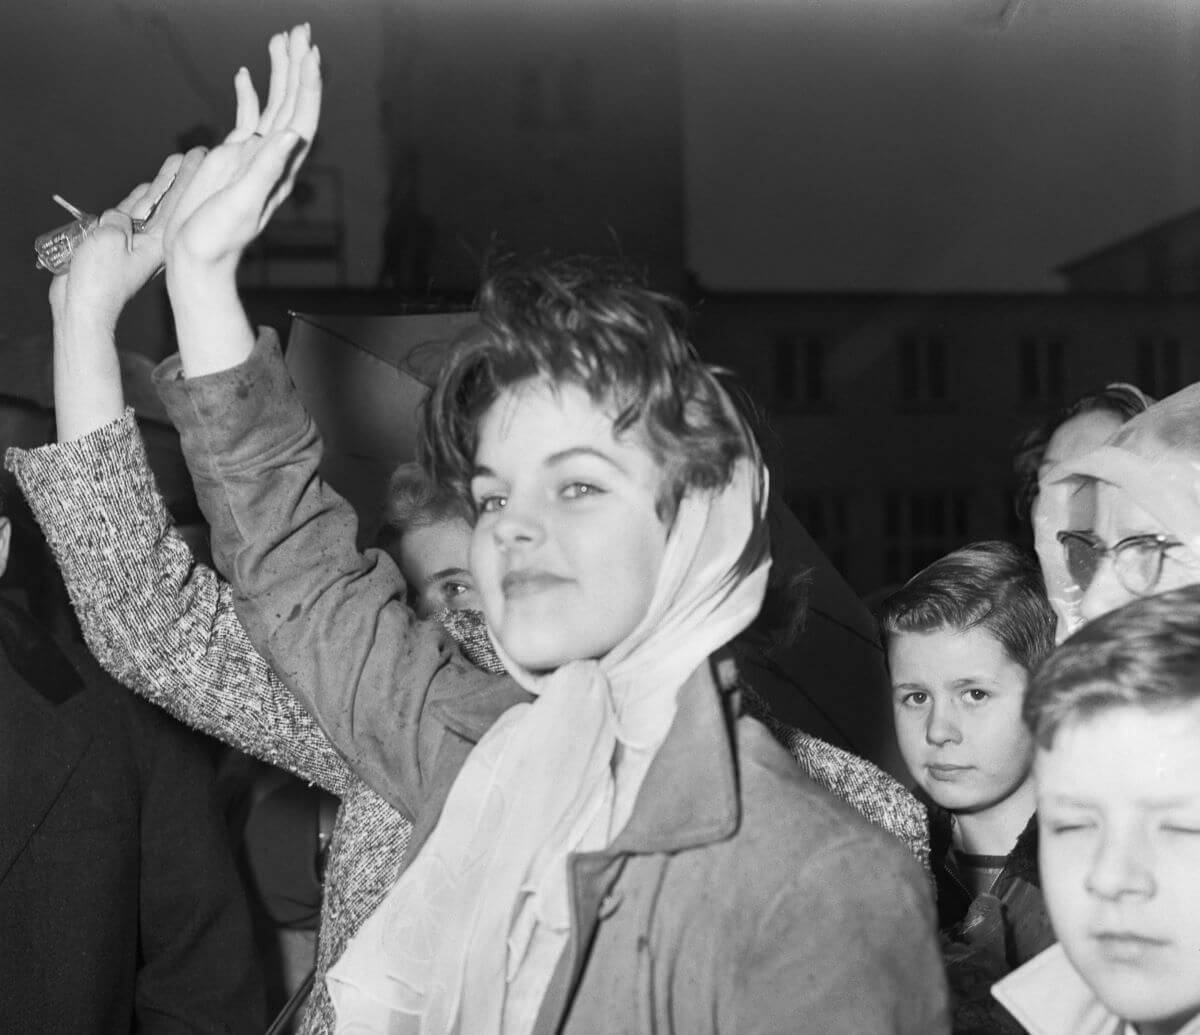 A black and white picture of Priscilla Presley lifting her arm in a wave. She wears a scarf around her hair and stands in a crowd.